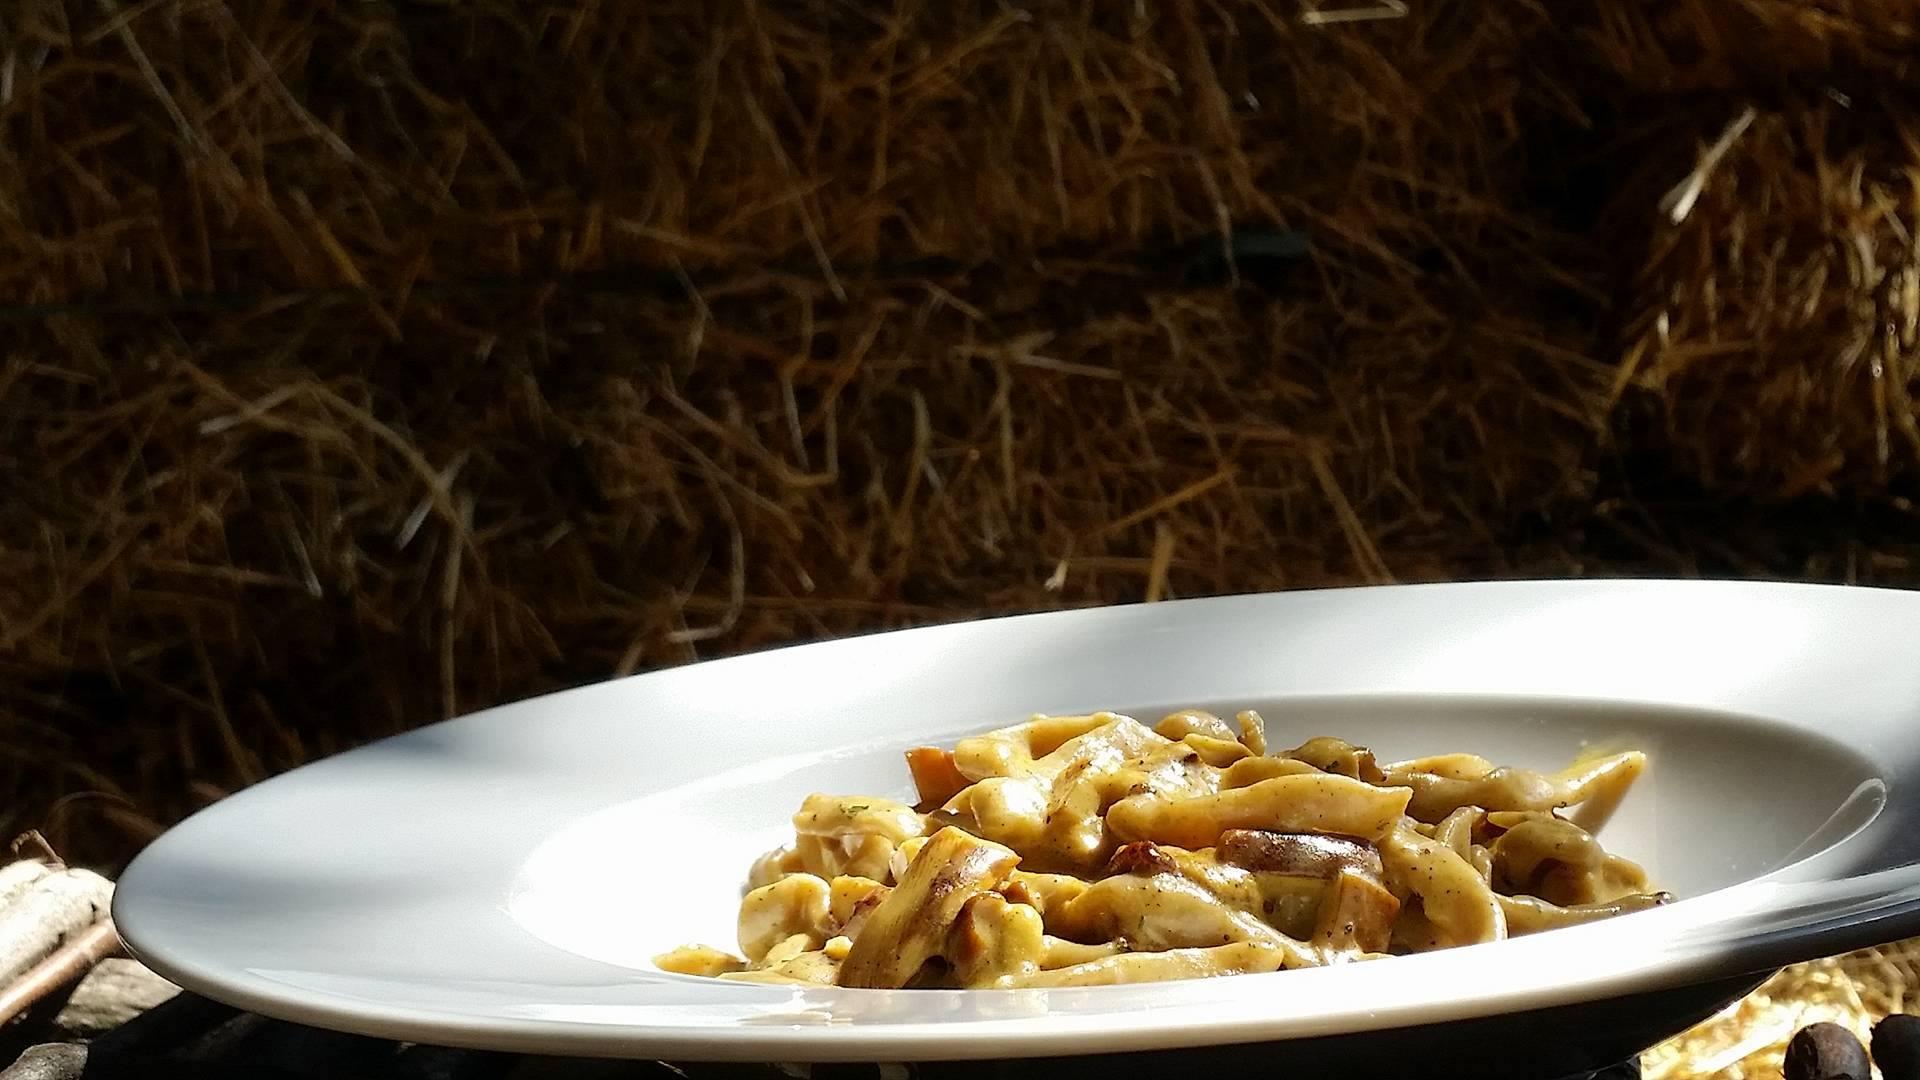 Kola's signature jufka pasta is homemade and dried out in the sun in traditional fashion